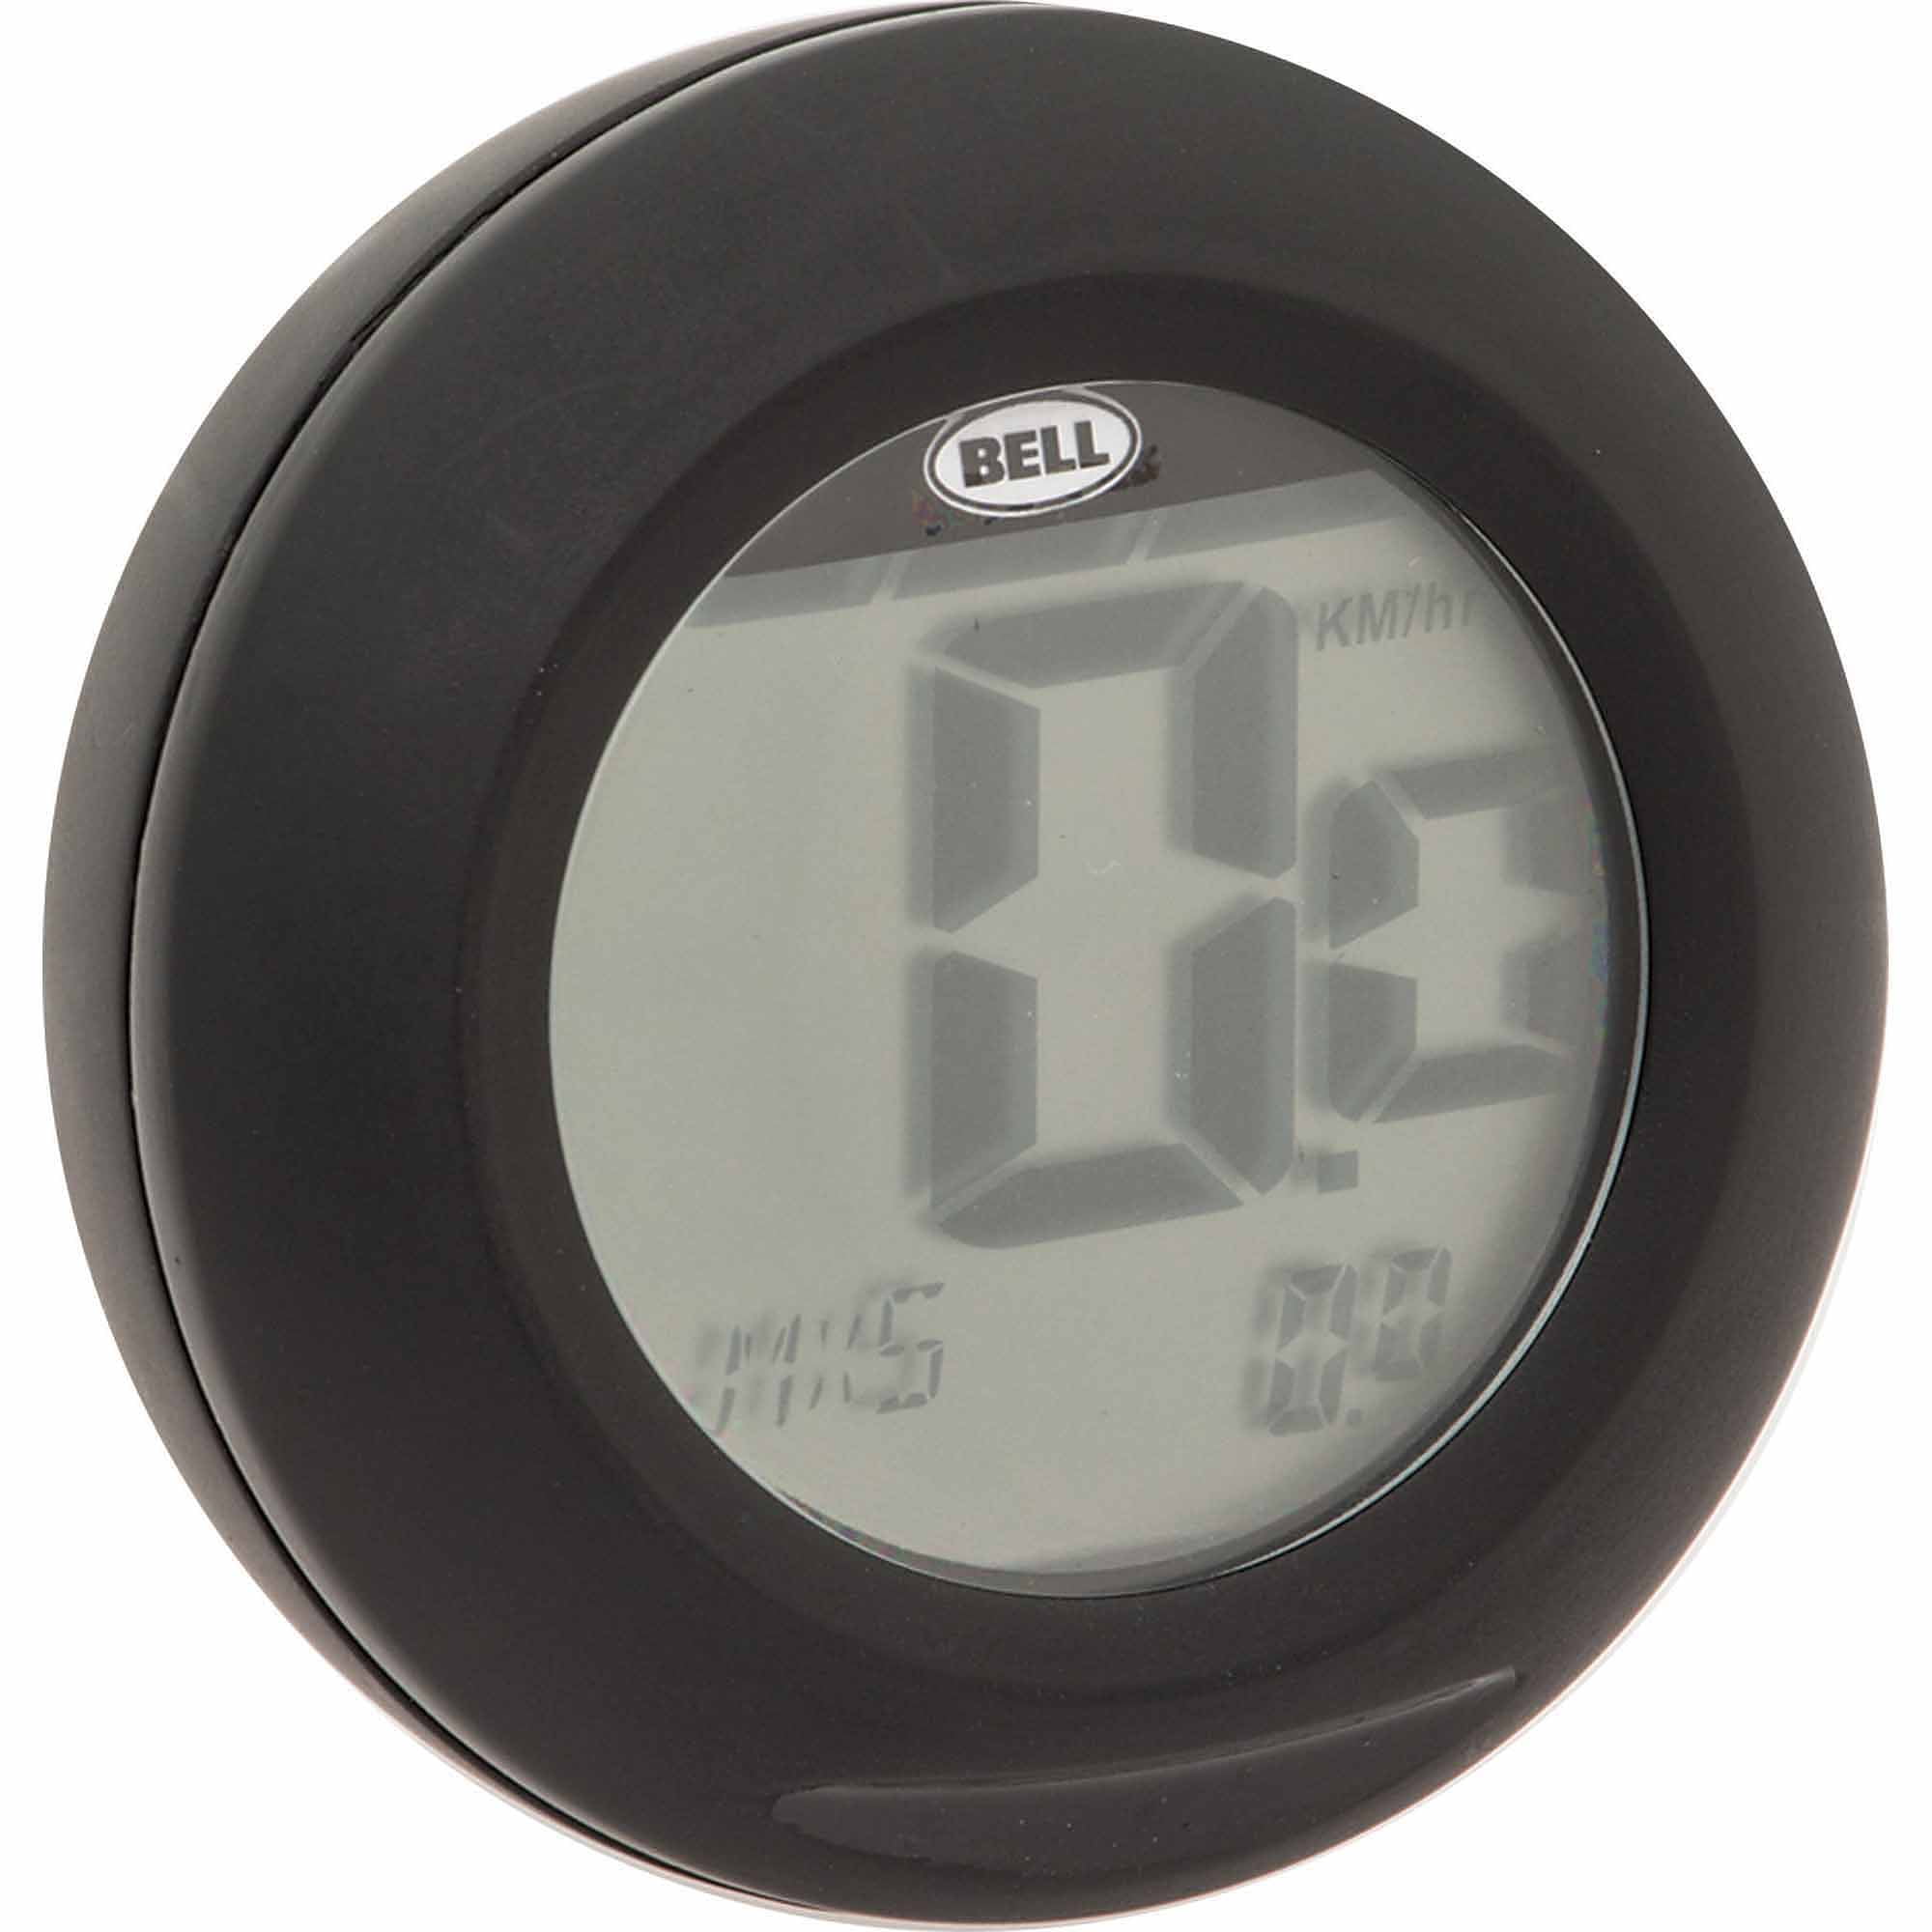 Bell Sports 7001115 F12 Bicycle Computer & Speedometer for sale online 